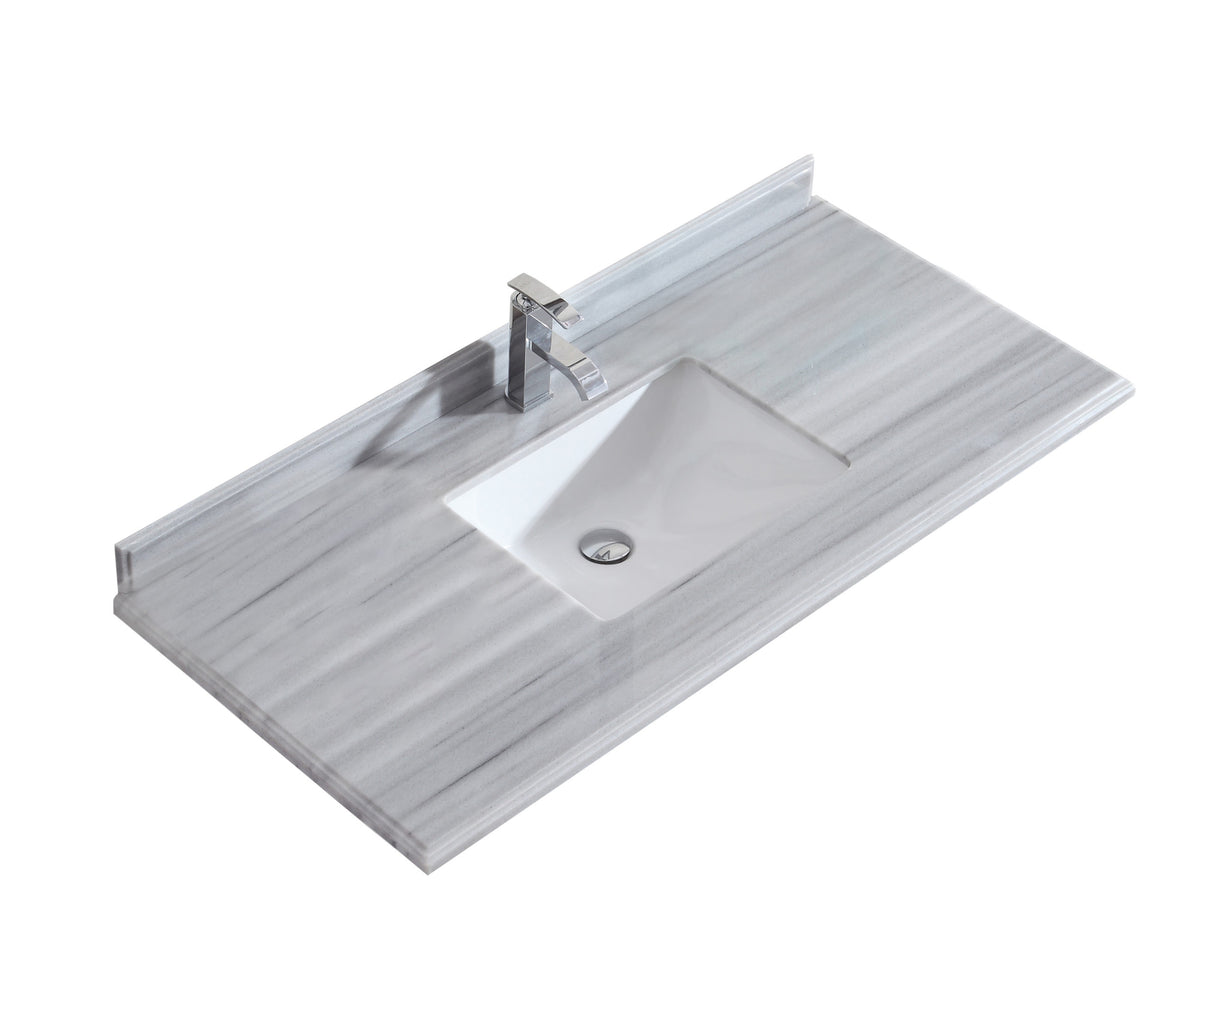 Forever 48" Single Hole White Stripes Marble Countertop with Rectangular Ceramic Sink Laviva 313SQ1H-48-WS